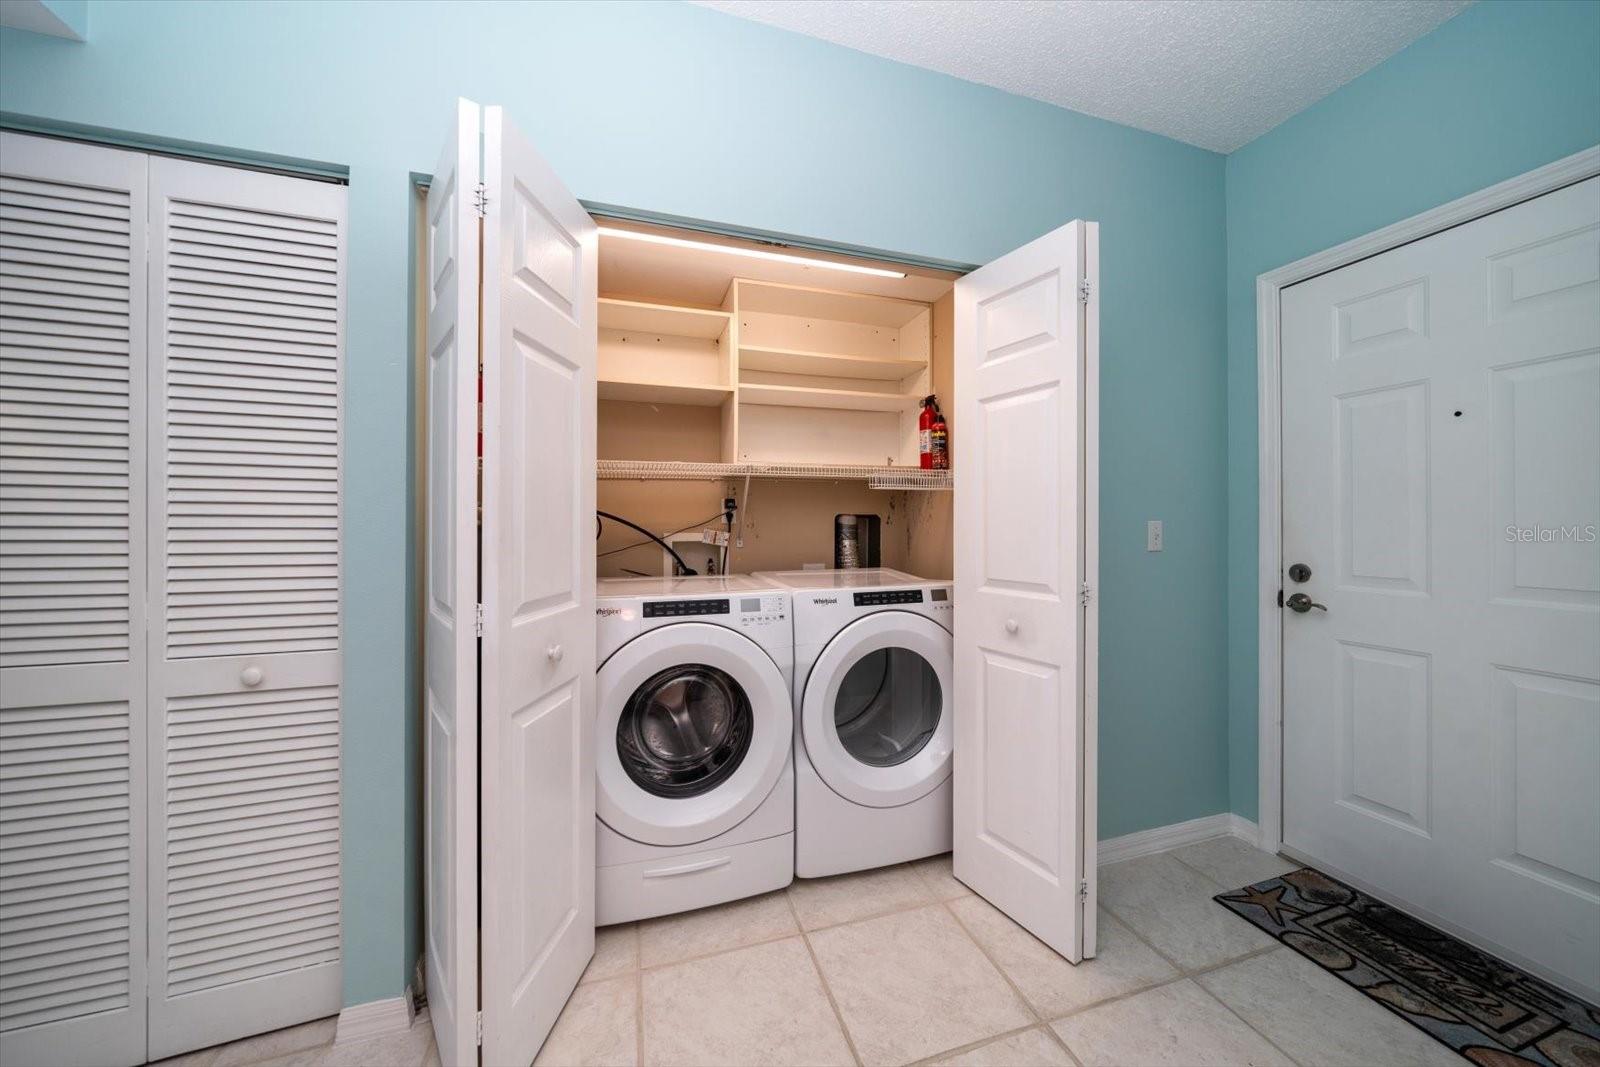 BRAND NEW WASHER AND DRYER!